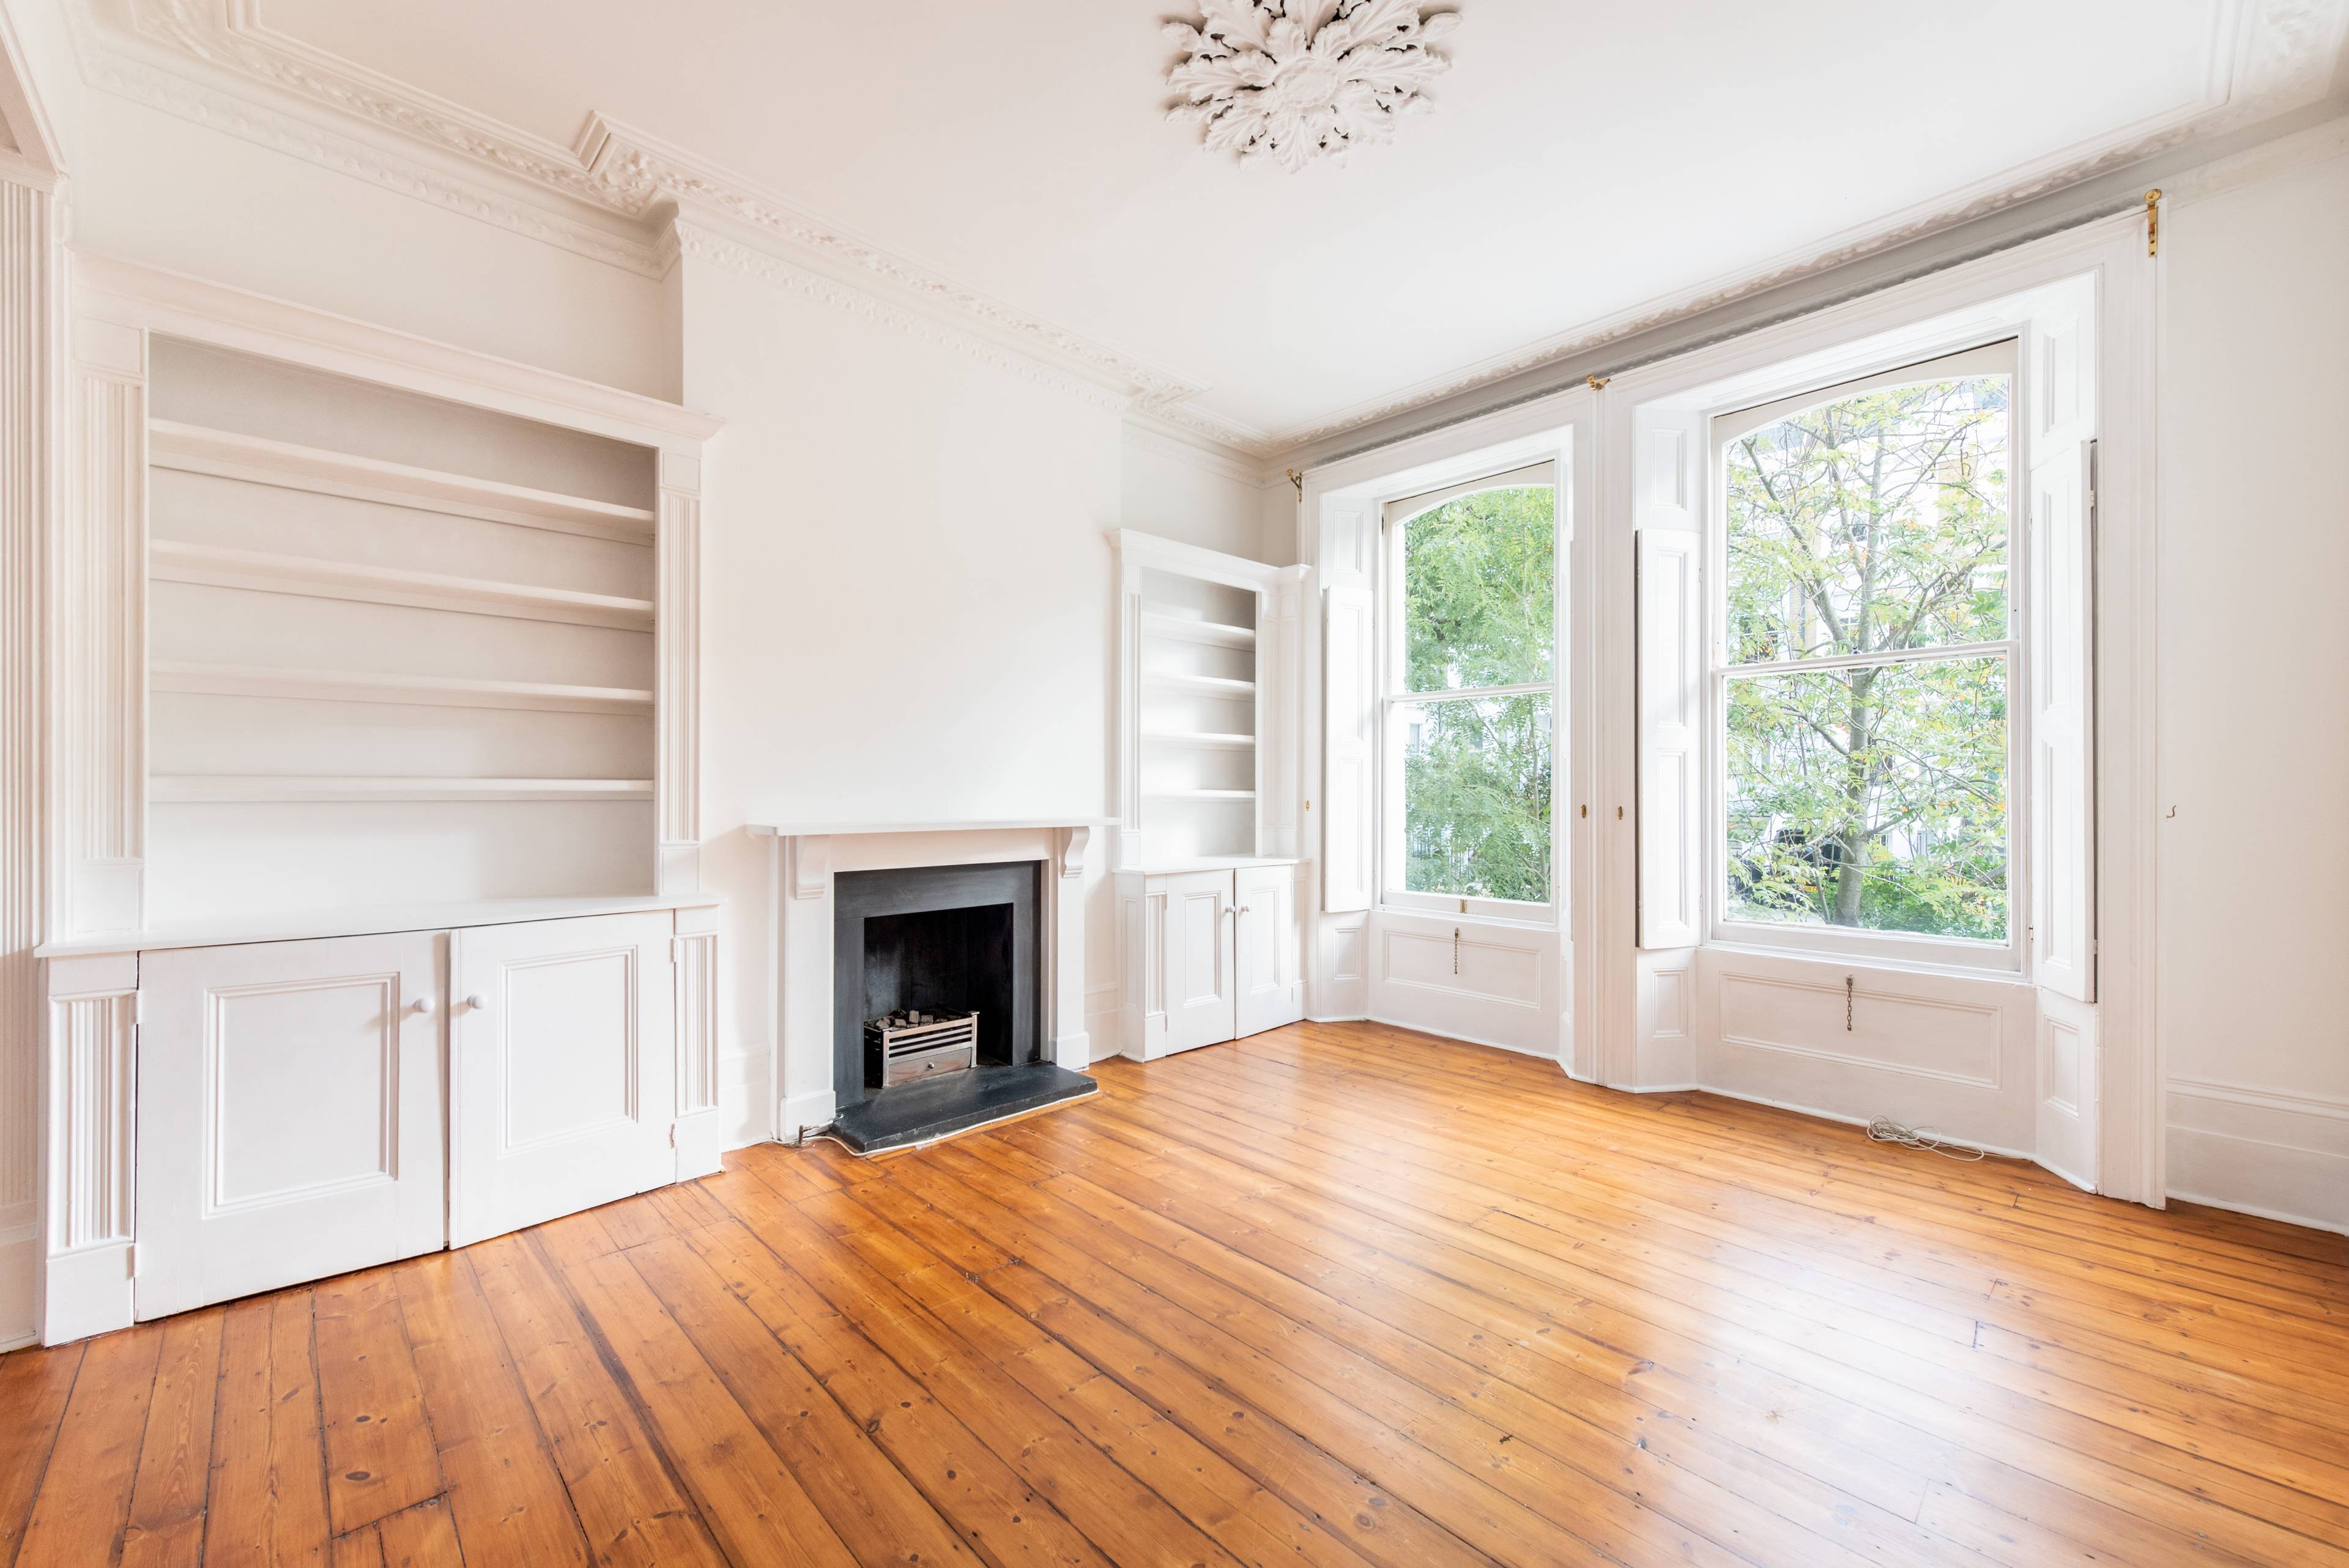 Gorgeous 3 Bedroom Duplex in the Heart of Notting Hill